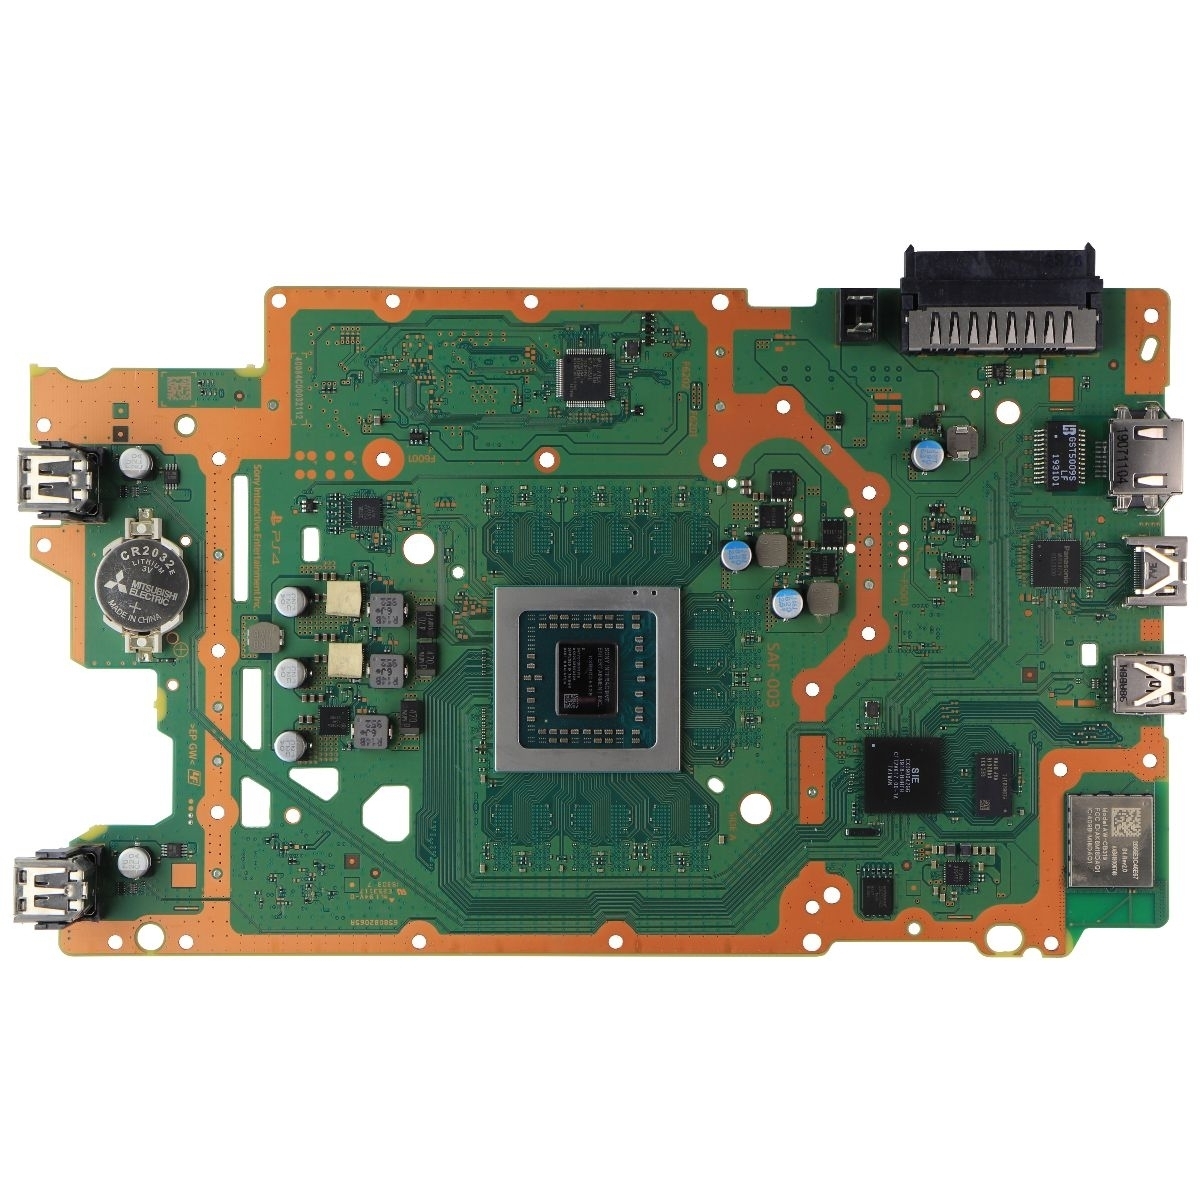 Sony Playstation 4 Slim OEM Replacement Motherboard (SAF-003) For CUH-2215B/2115 (Refurbished)